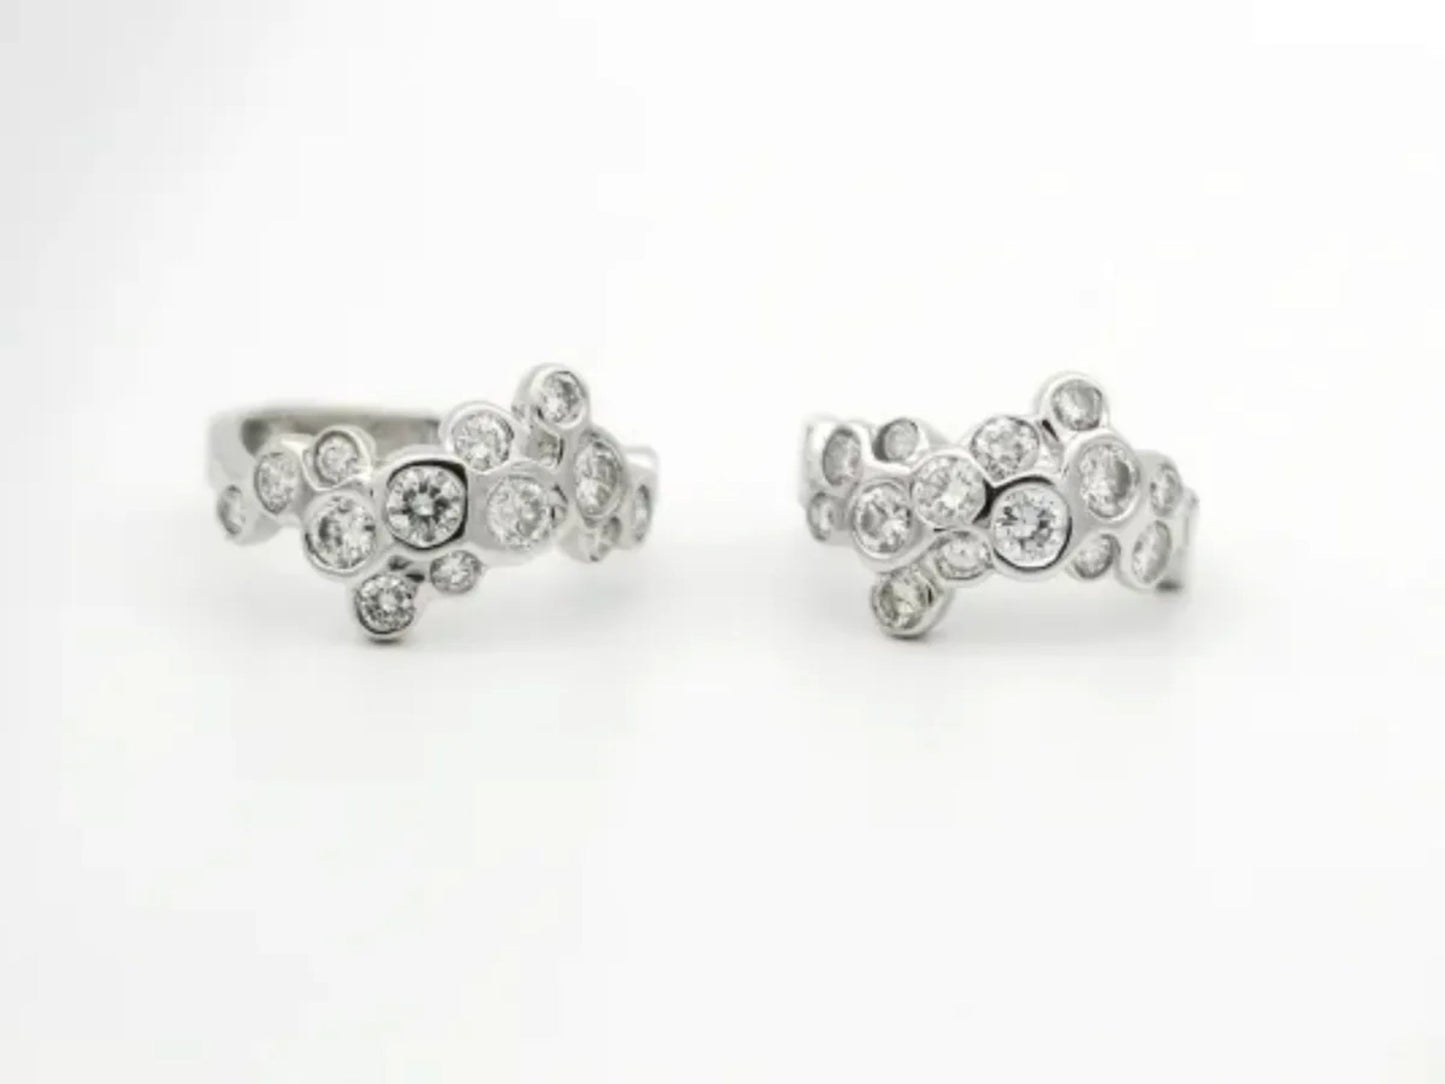 Matching Set - Pick One Or Both (sold separately). 14K White Gold Diamond Bubble Ring Gillespie Fine Jewelers